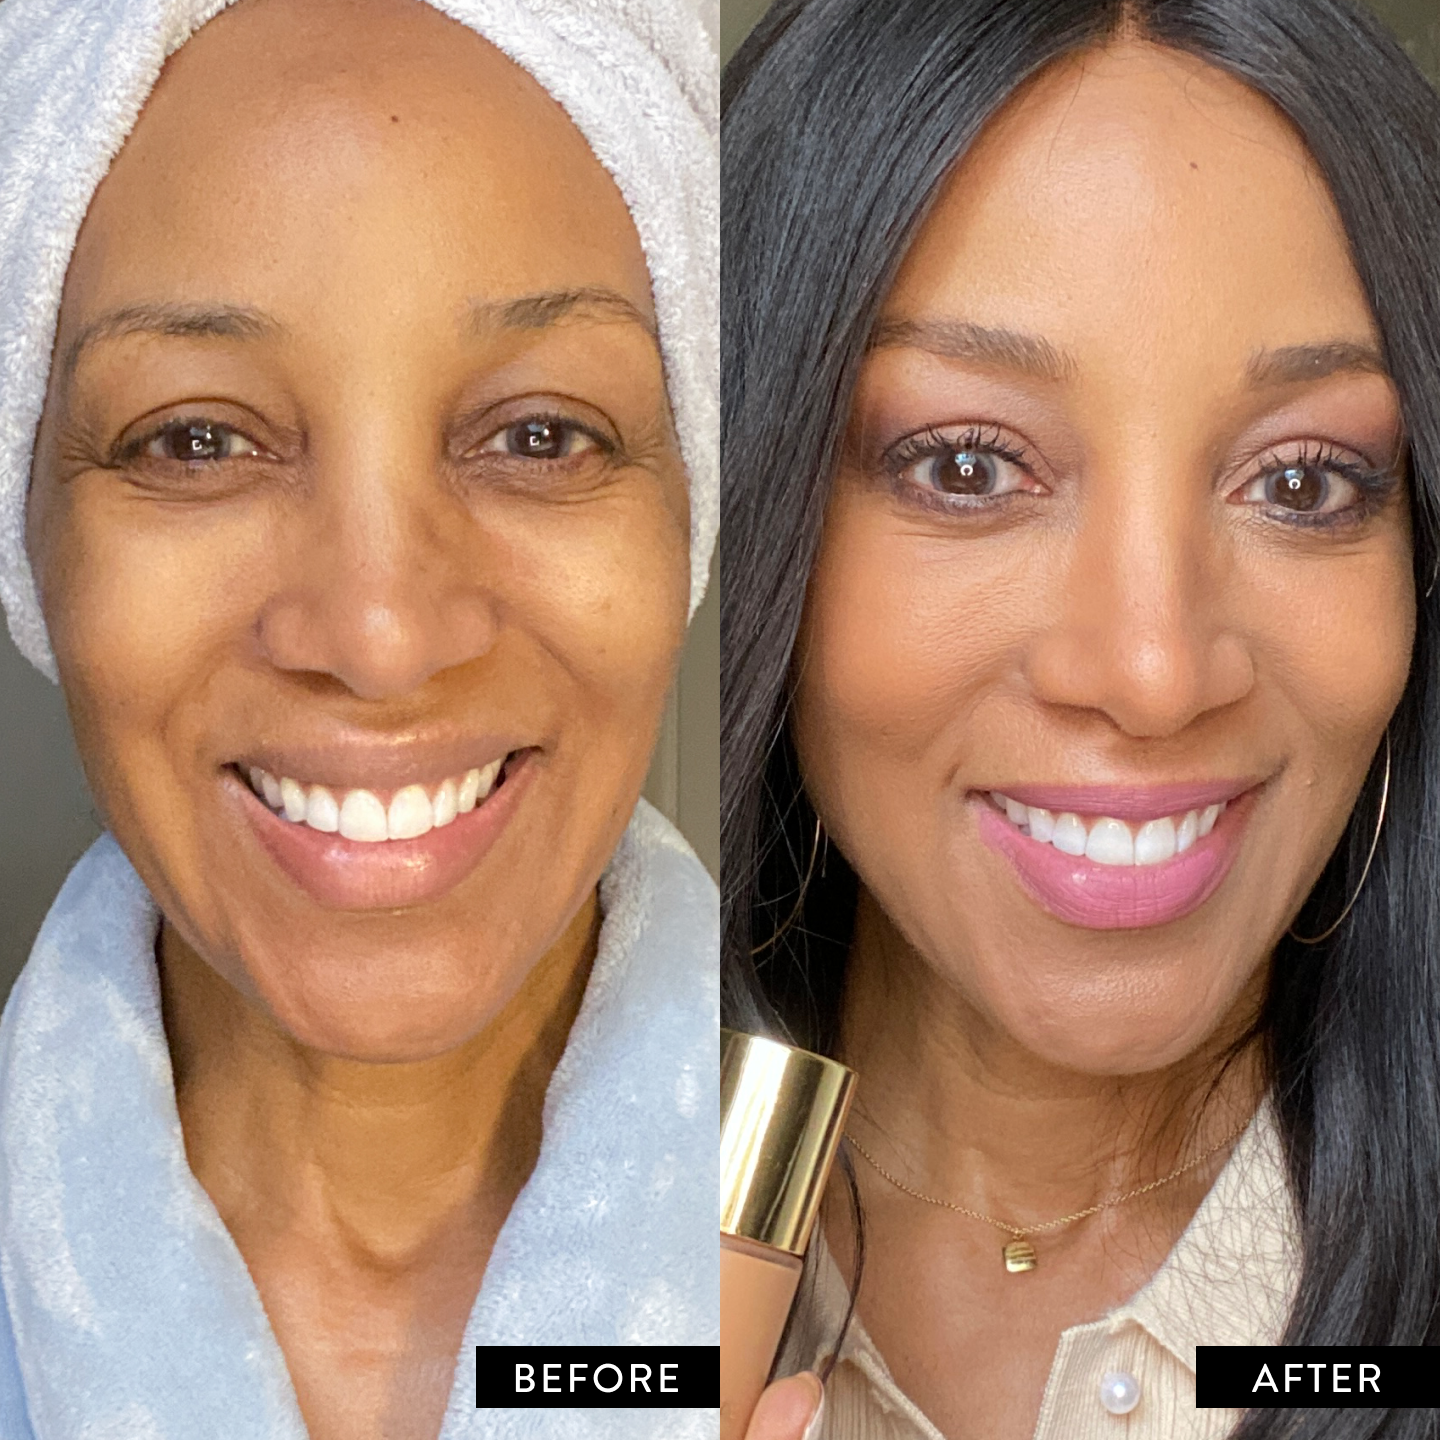 Before and after applying Laura Geller's Double Take Liquid foundation on Shaun Robinson